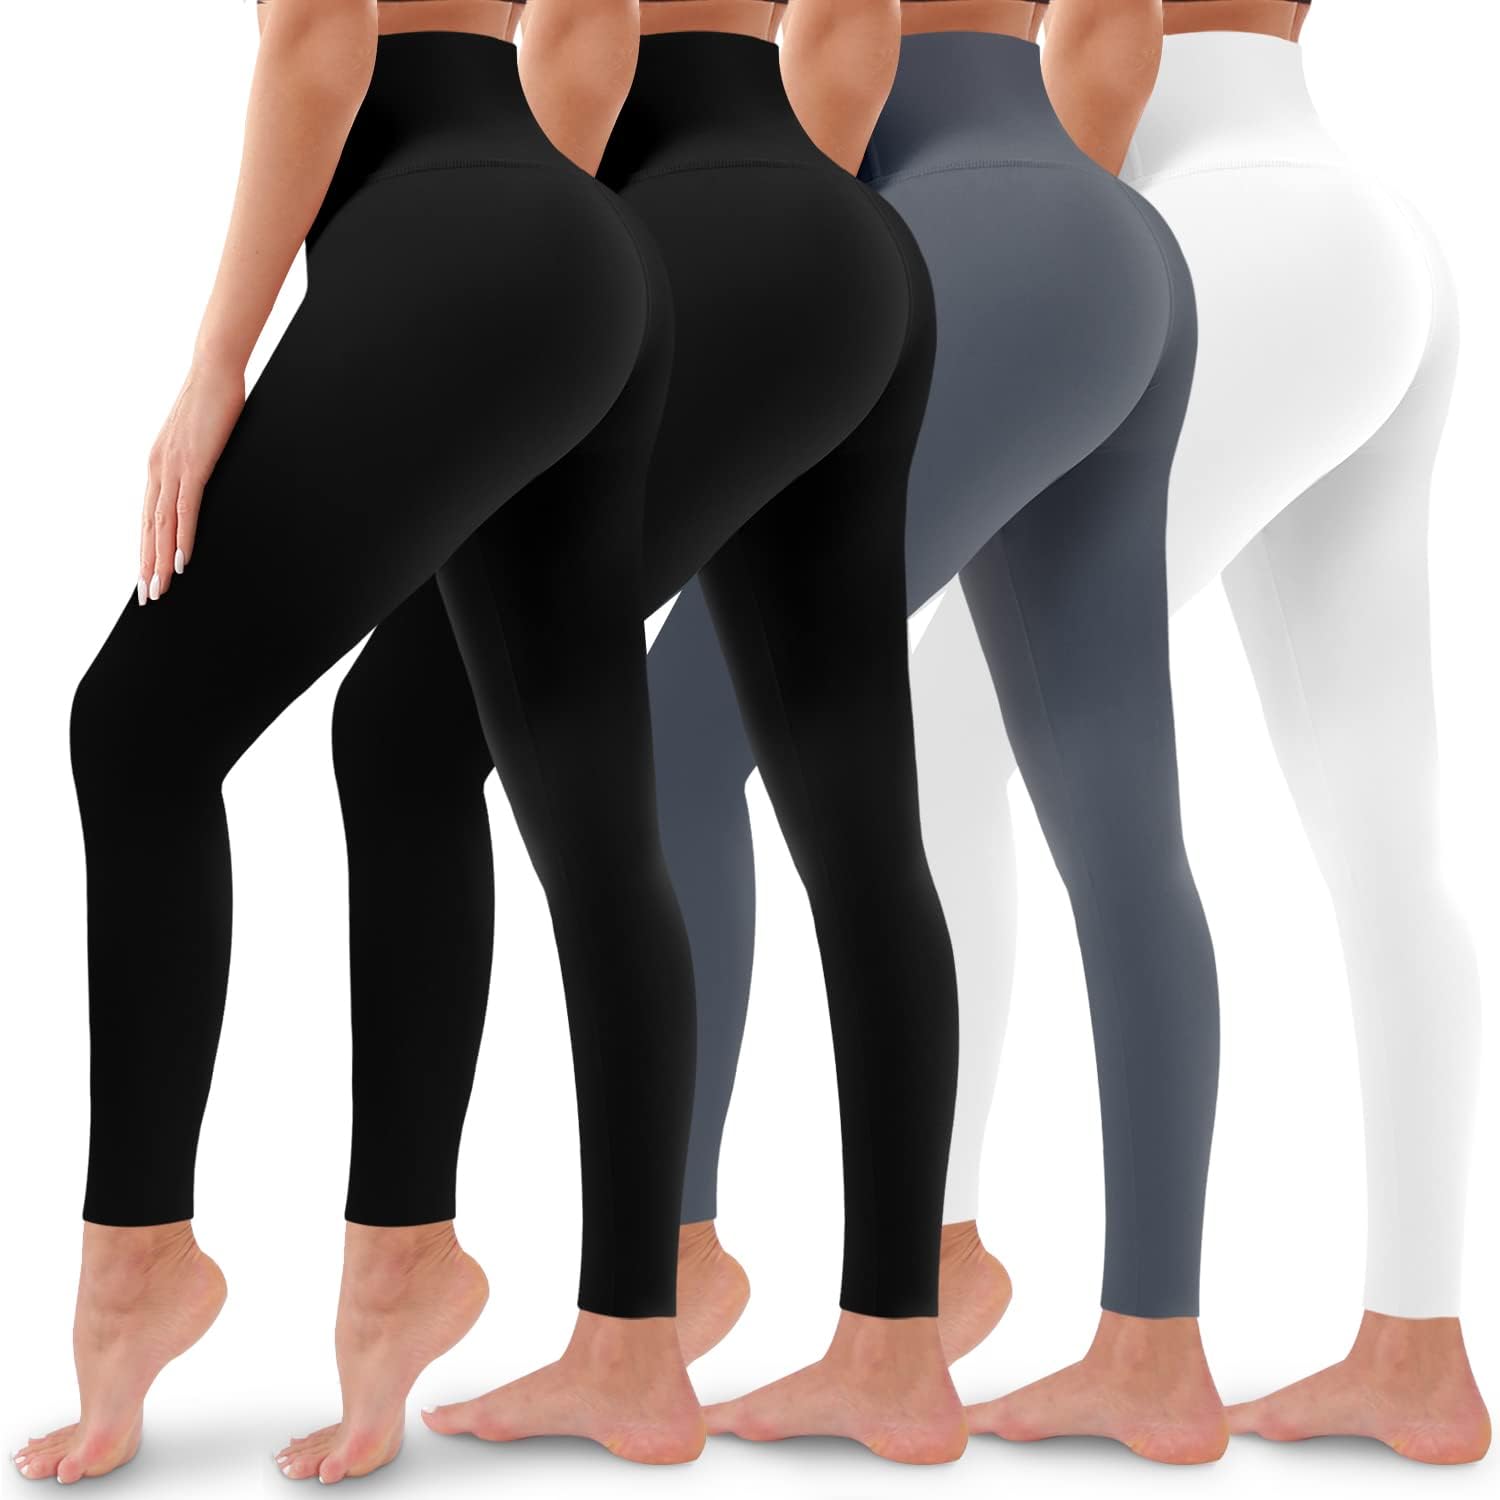 4 Pack Leggings for Women Butt Lift High Waisted Tummy Control No See-Through Yoga Pants Workout Running Leggings